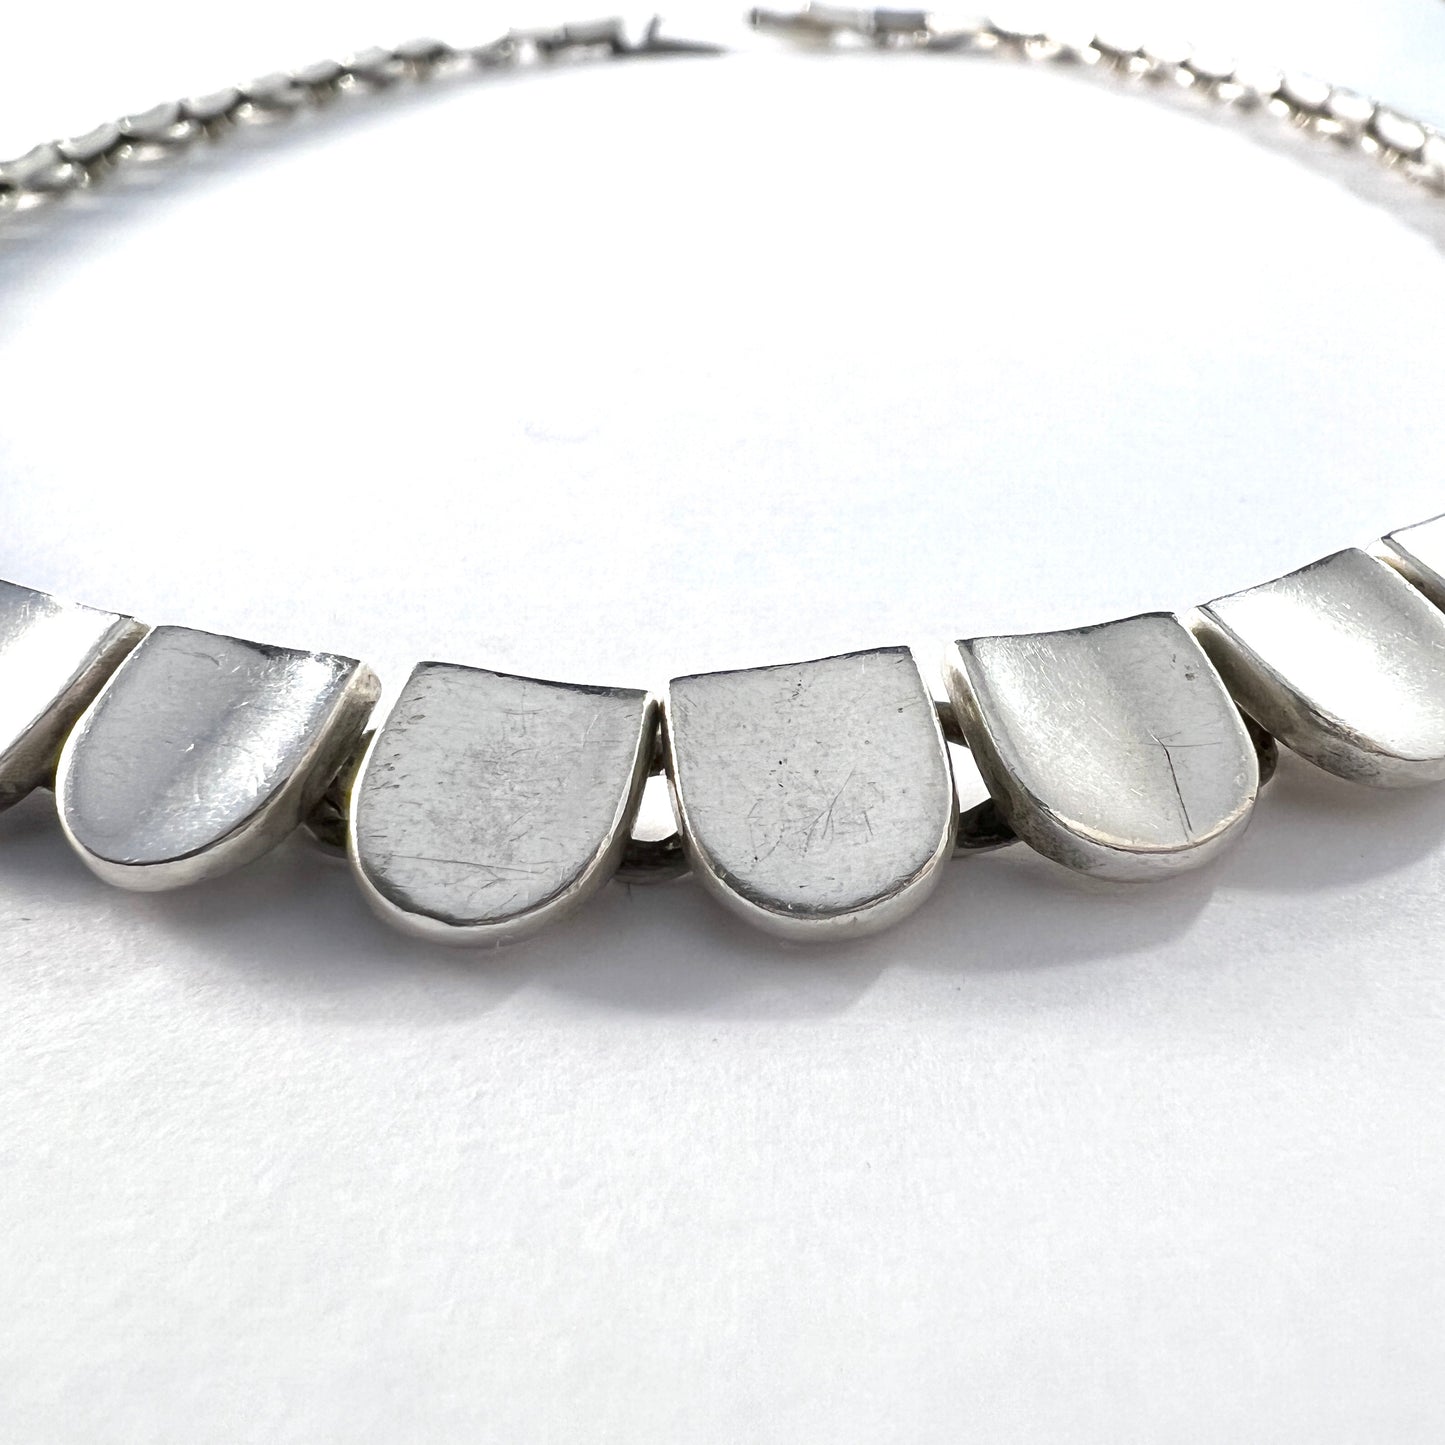 Mexico, Heavy Vintage Sterling Silver Necklace.